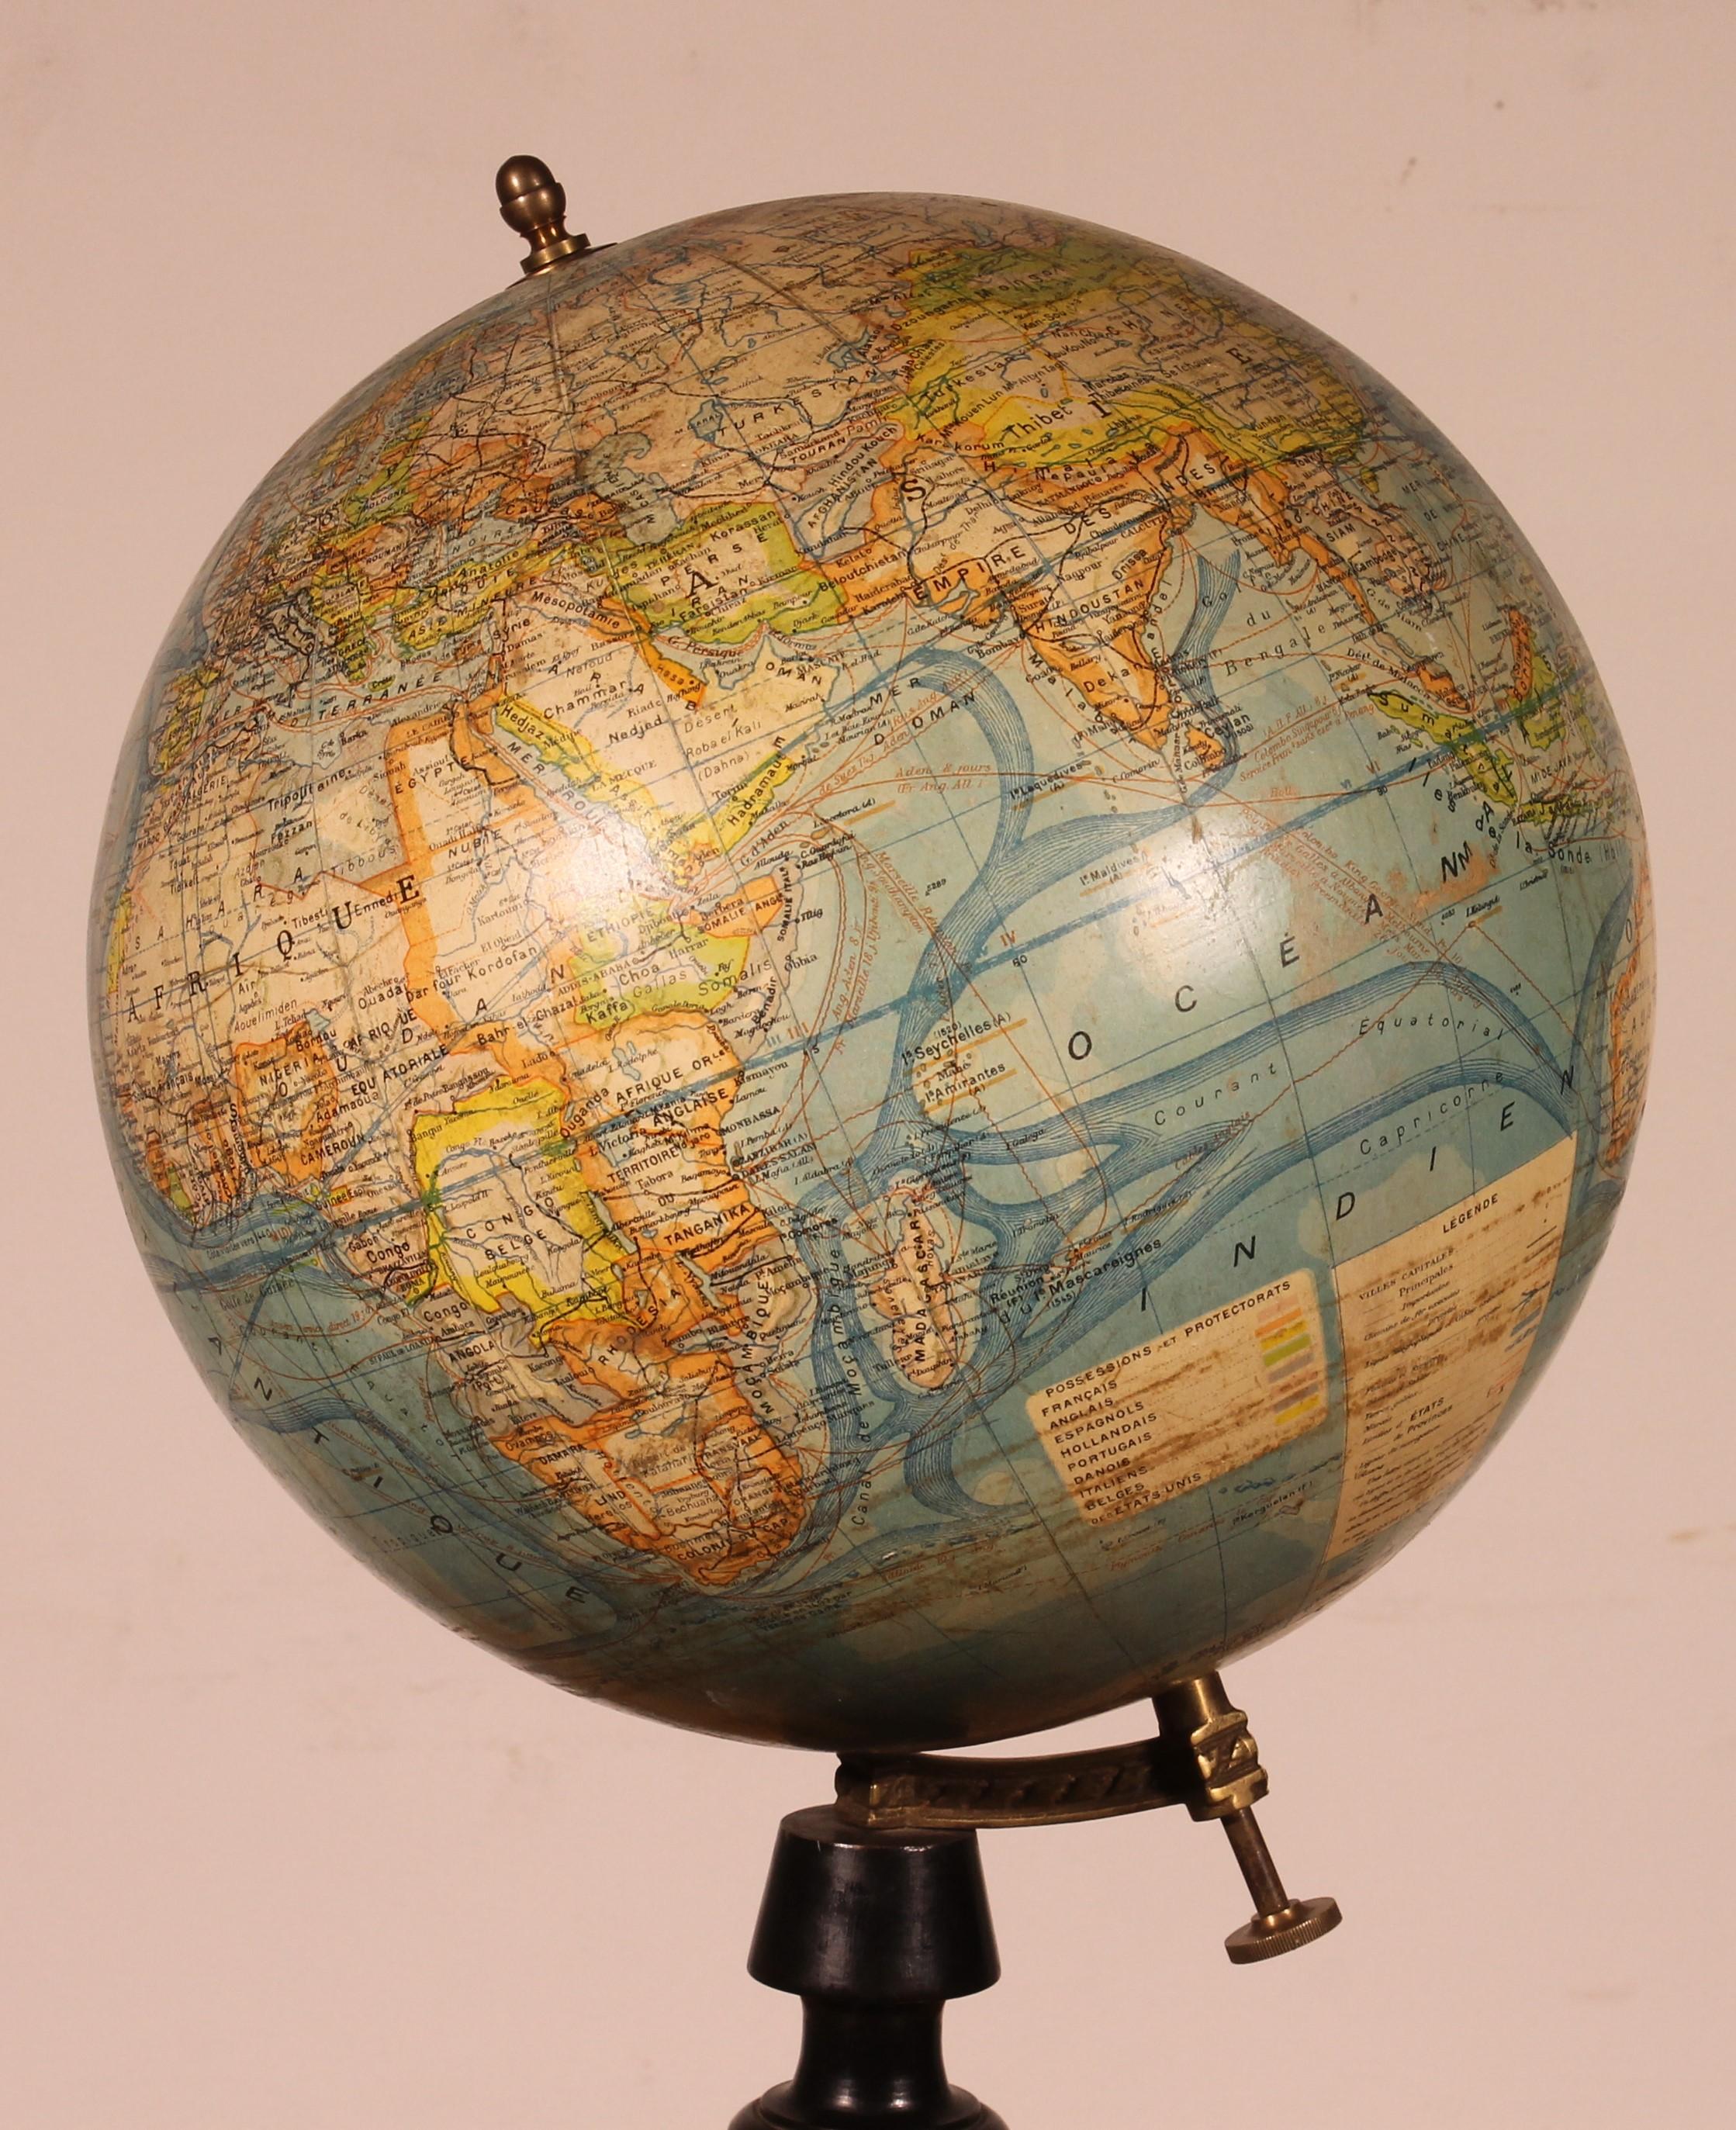 Very beautiful Terrestrial Globe from the beginning of the 20th century circa 1910 by J. Forest Paris Rue de Bucci

The Terrestrial Globe has a very beautiful blackened wooden base with a beautiful turning

Very beautiful Terrestrial Globe in superb